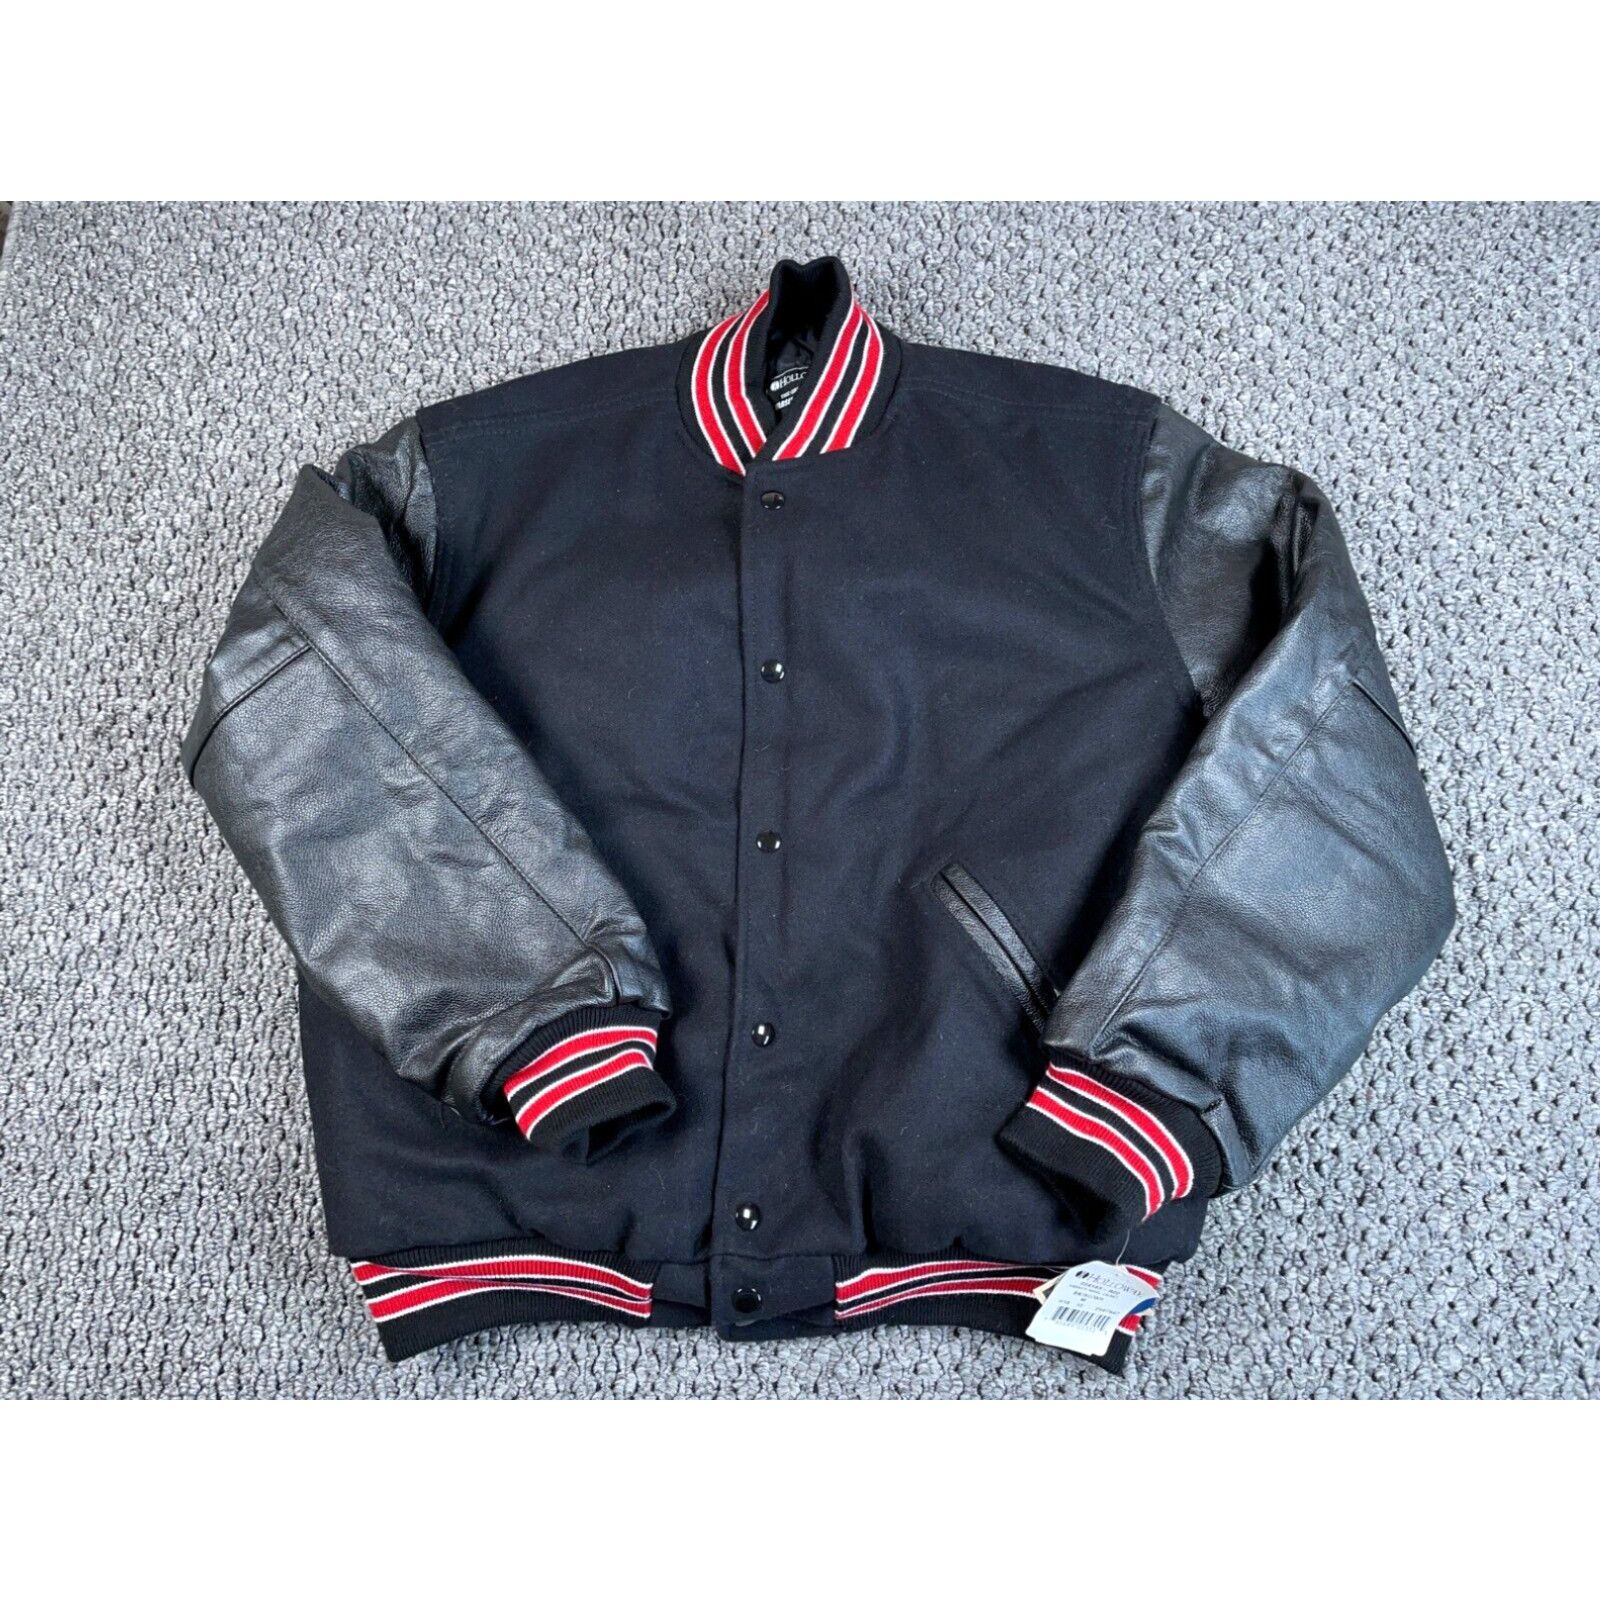 Holloway Holloway Leather Wool Varsity Bomber Jacket Adult Medium Black Red Size US M / EU 48-50 / 2 - 1 Preview